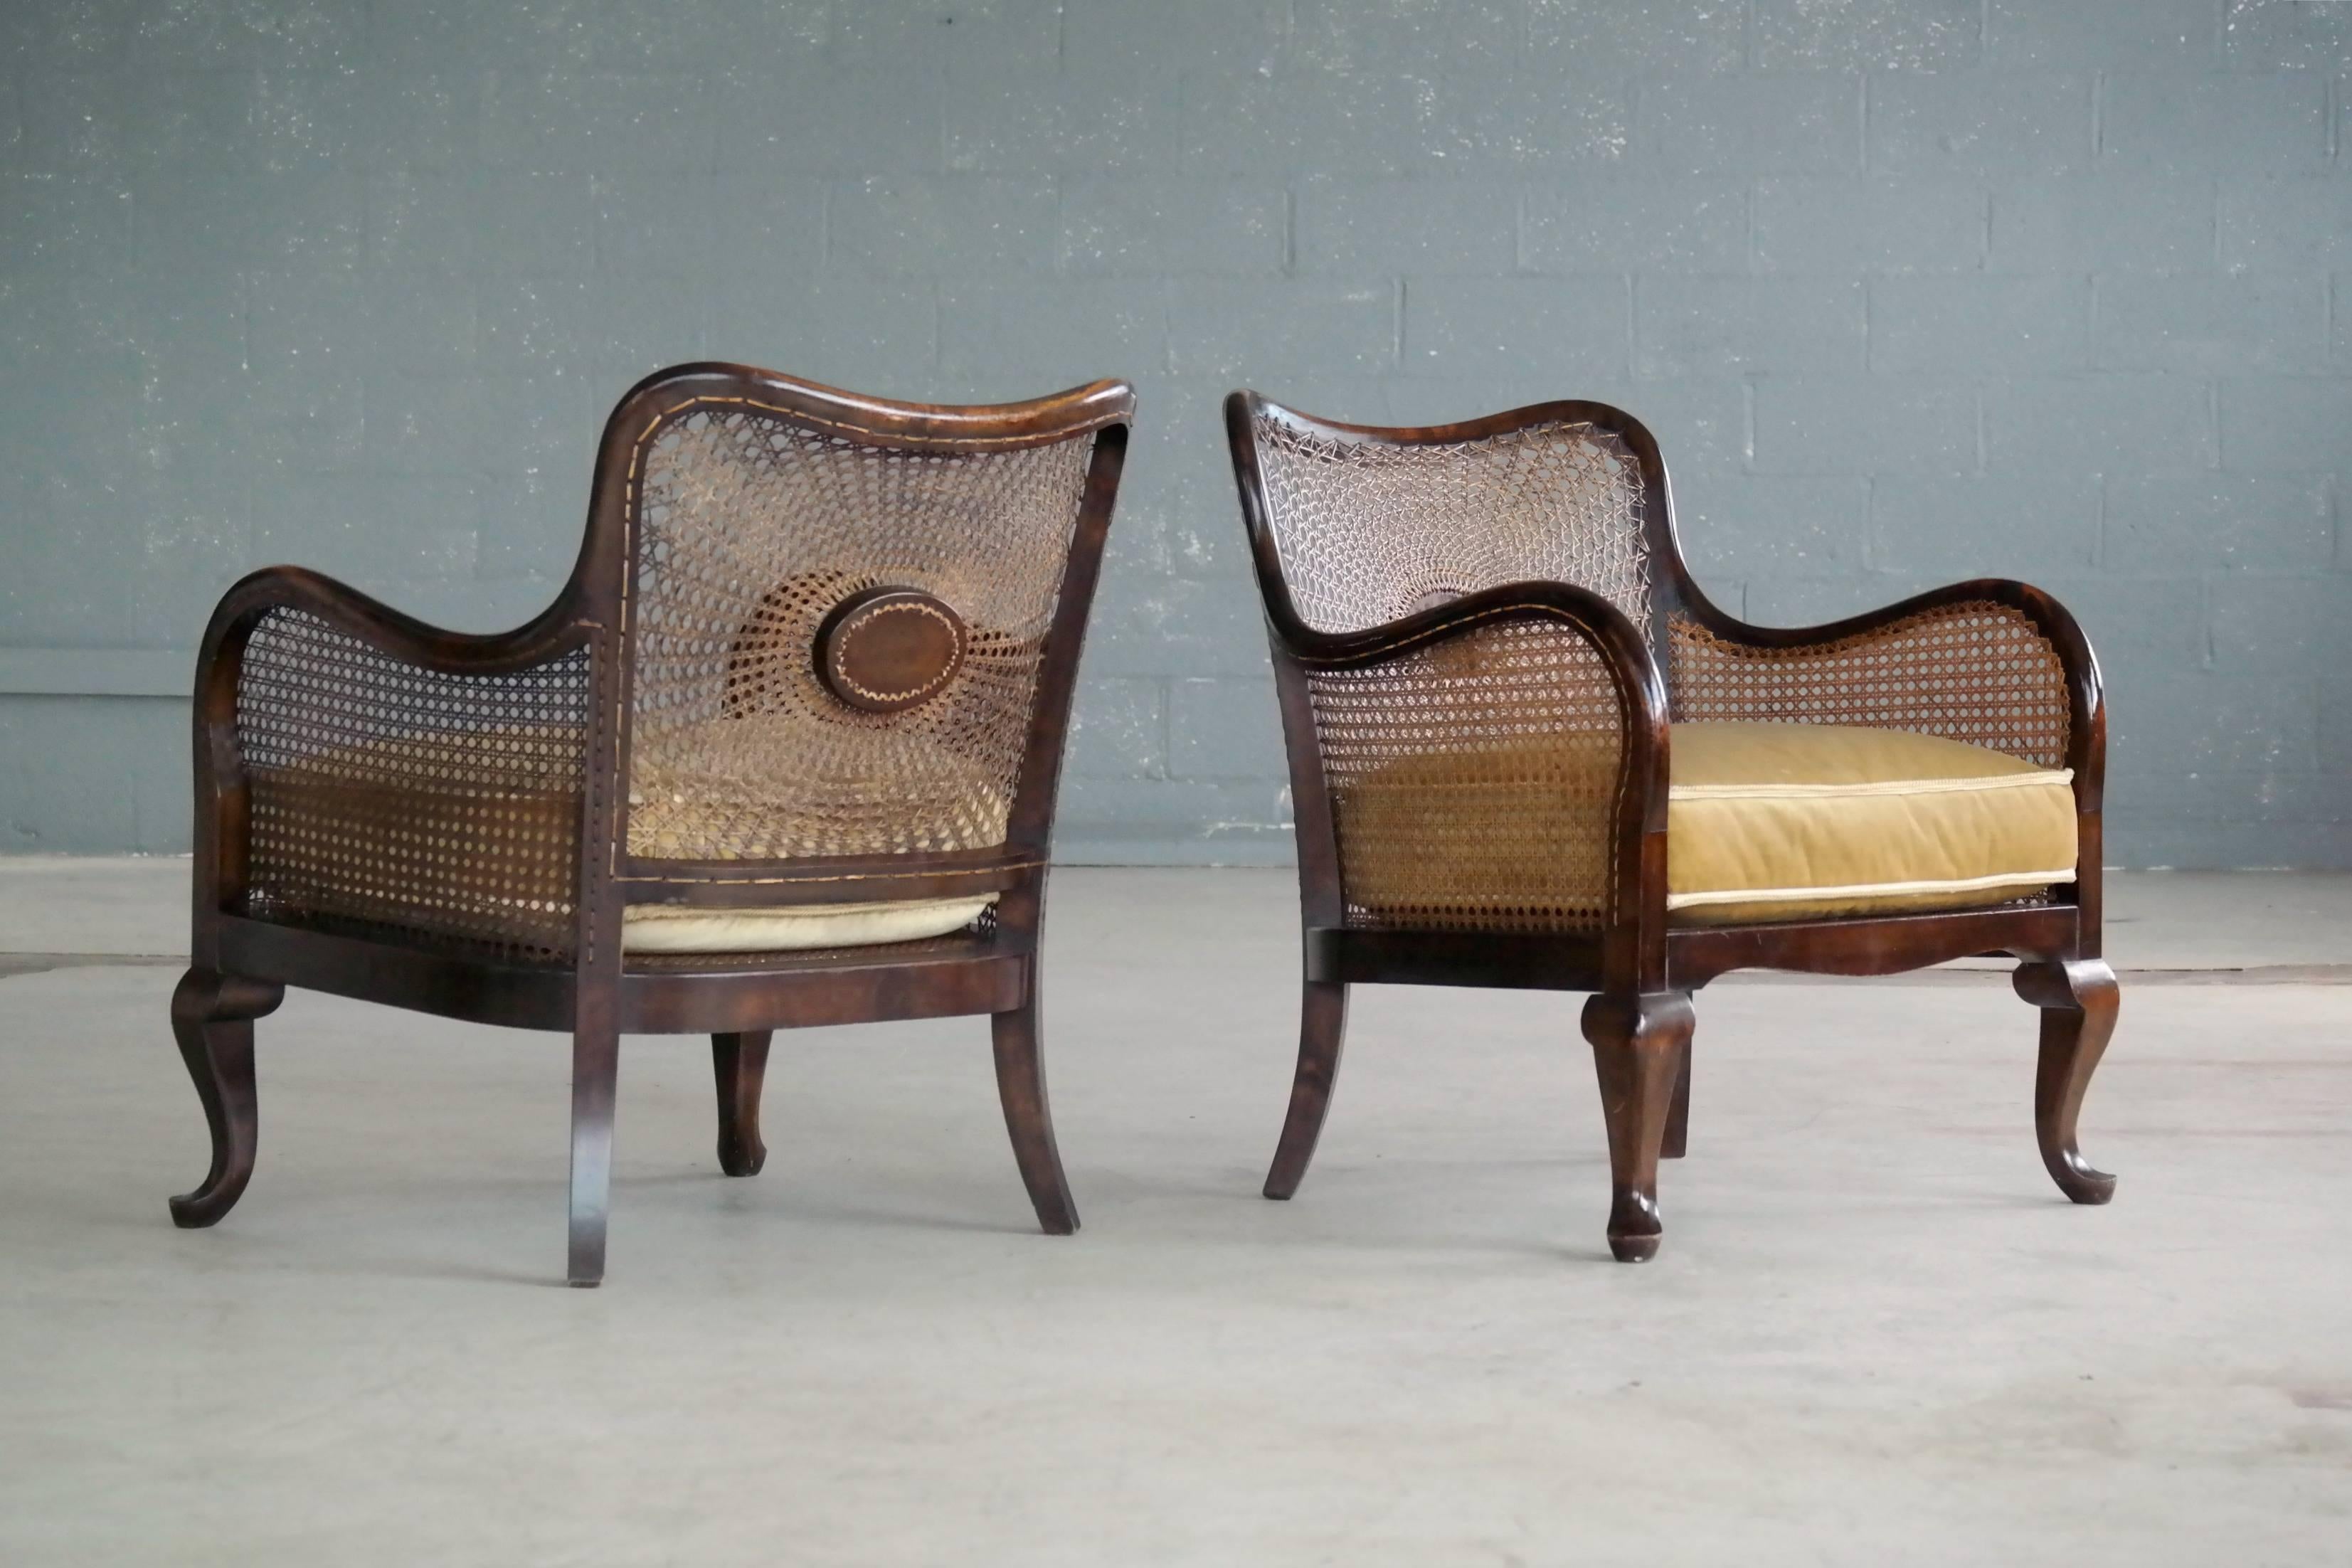 Very elegant and simple lines yet exuberant execution of detail. We found these art nouveau period caned bergeres handwoven in a spider pattern with mohair velvet cushions in Denmark. Made from stained birch and woven cane in the early part of the